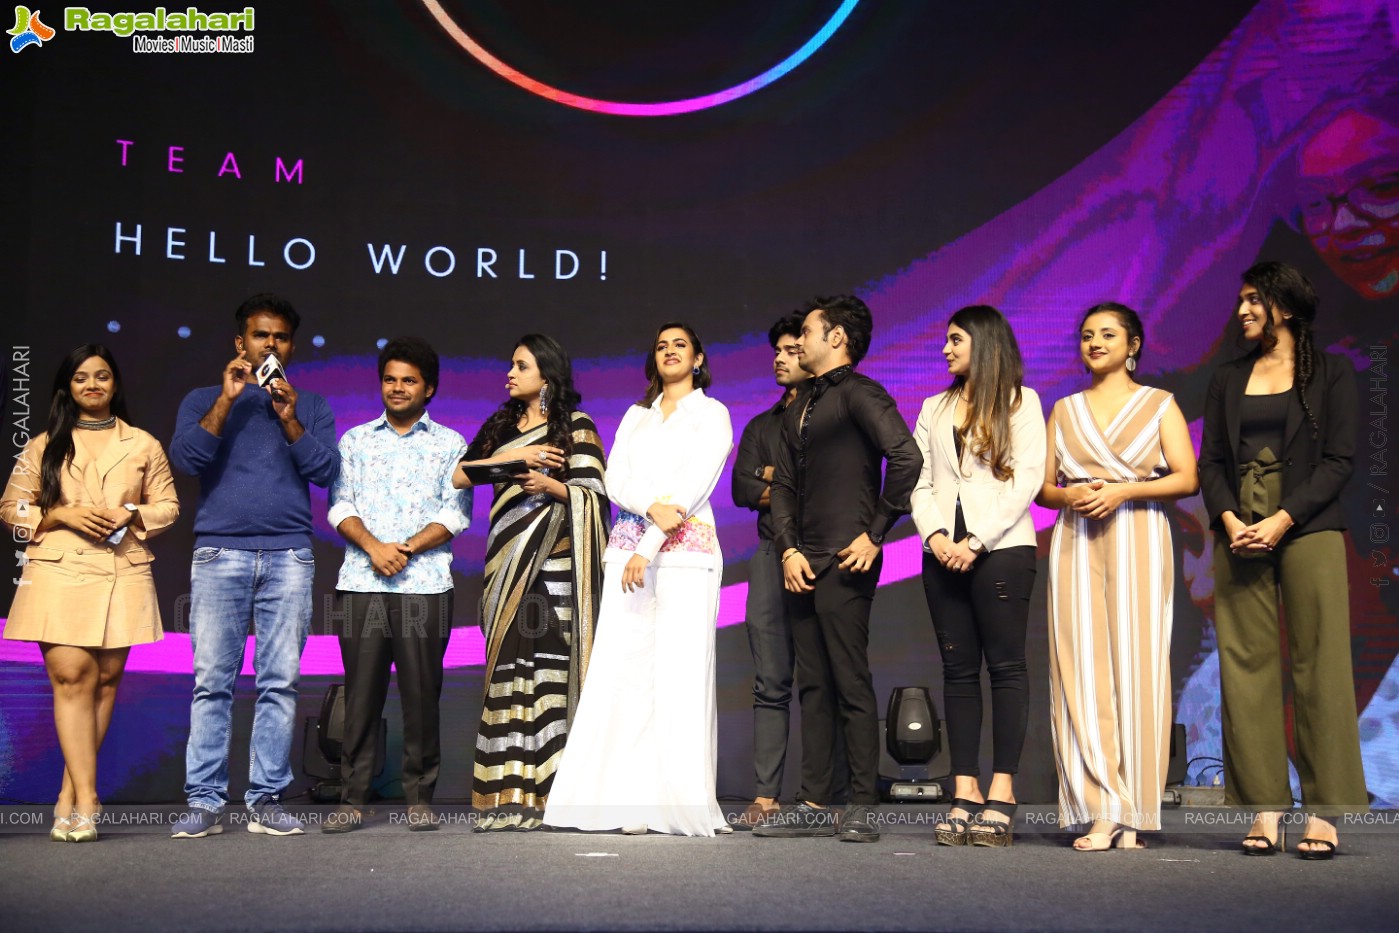 ZEE5 Announces 11 Originals Belonging to a Variety of Genres, Themes